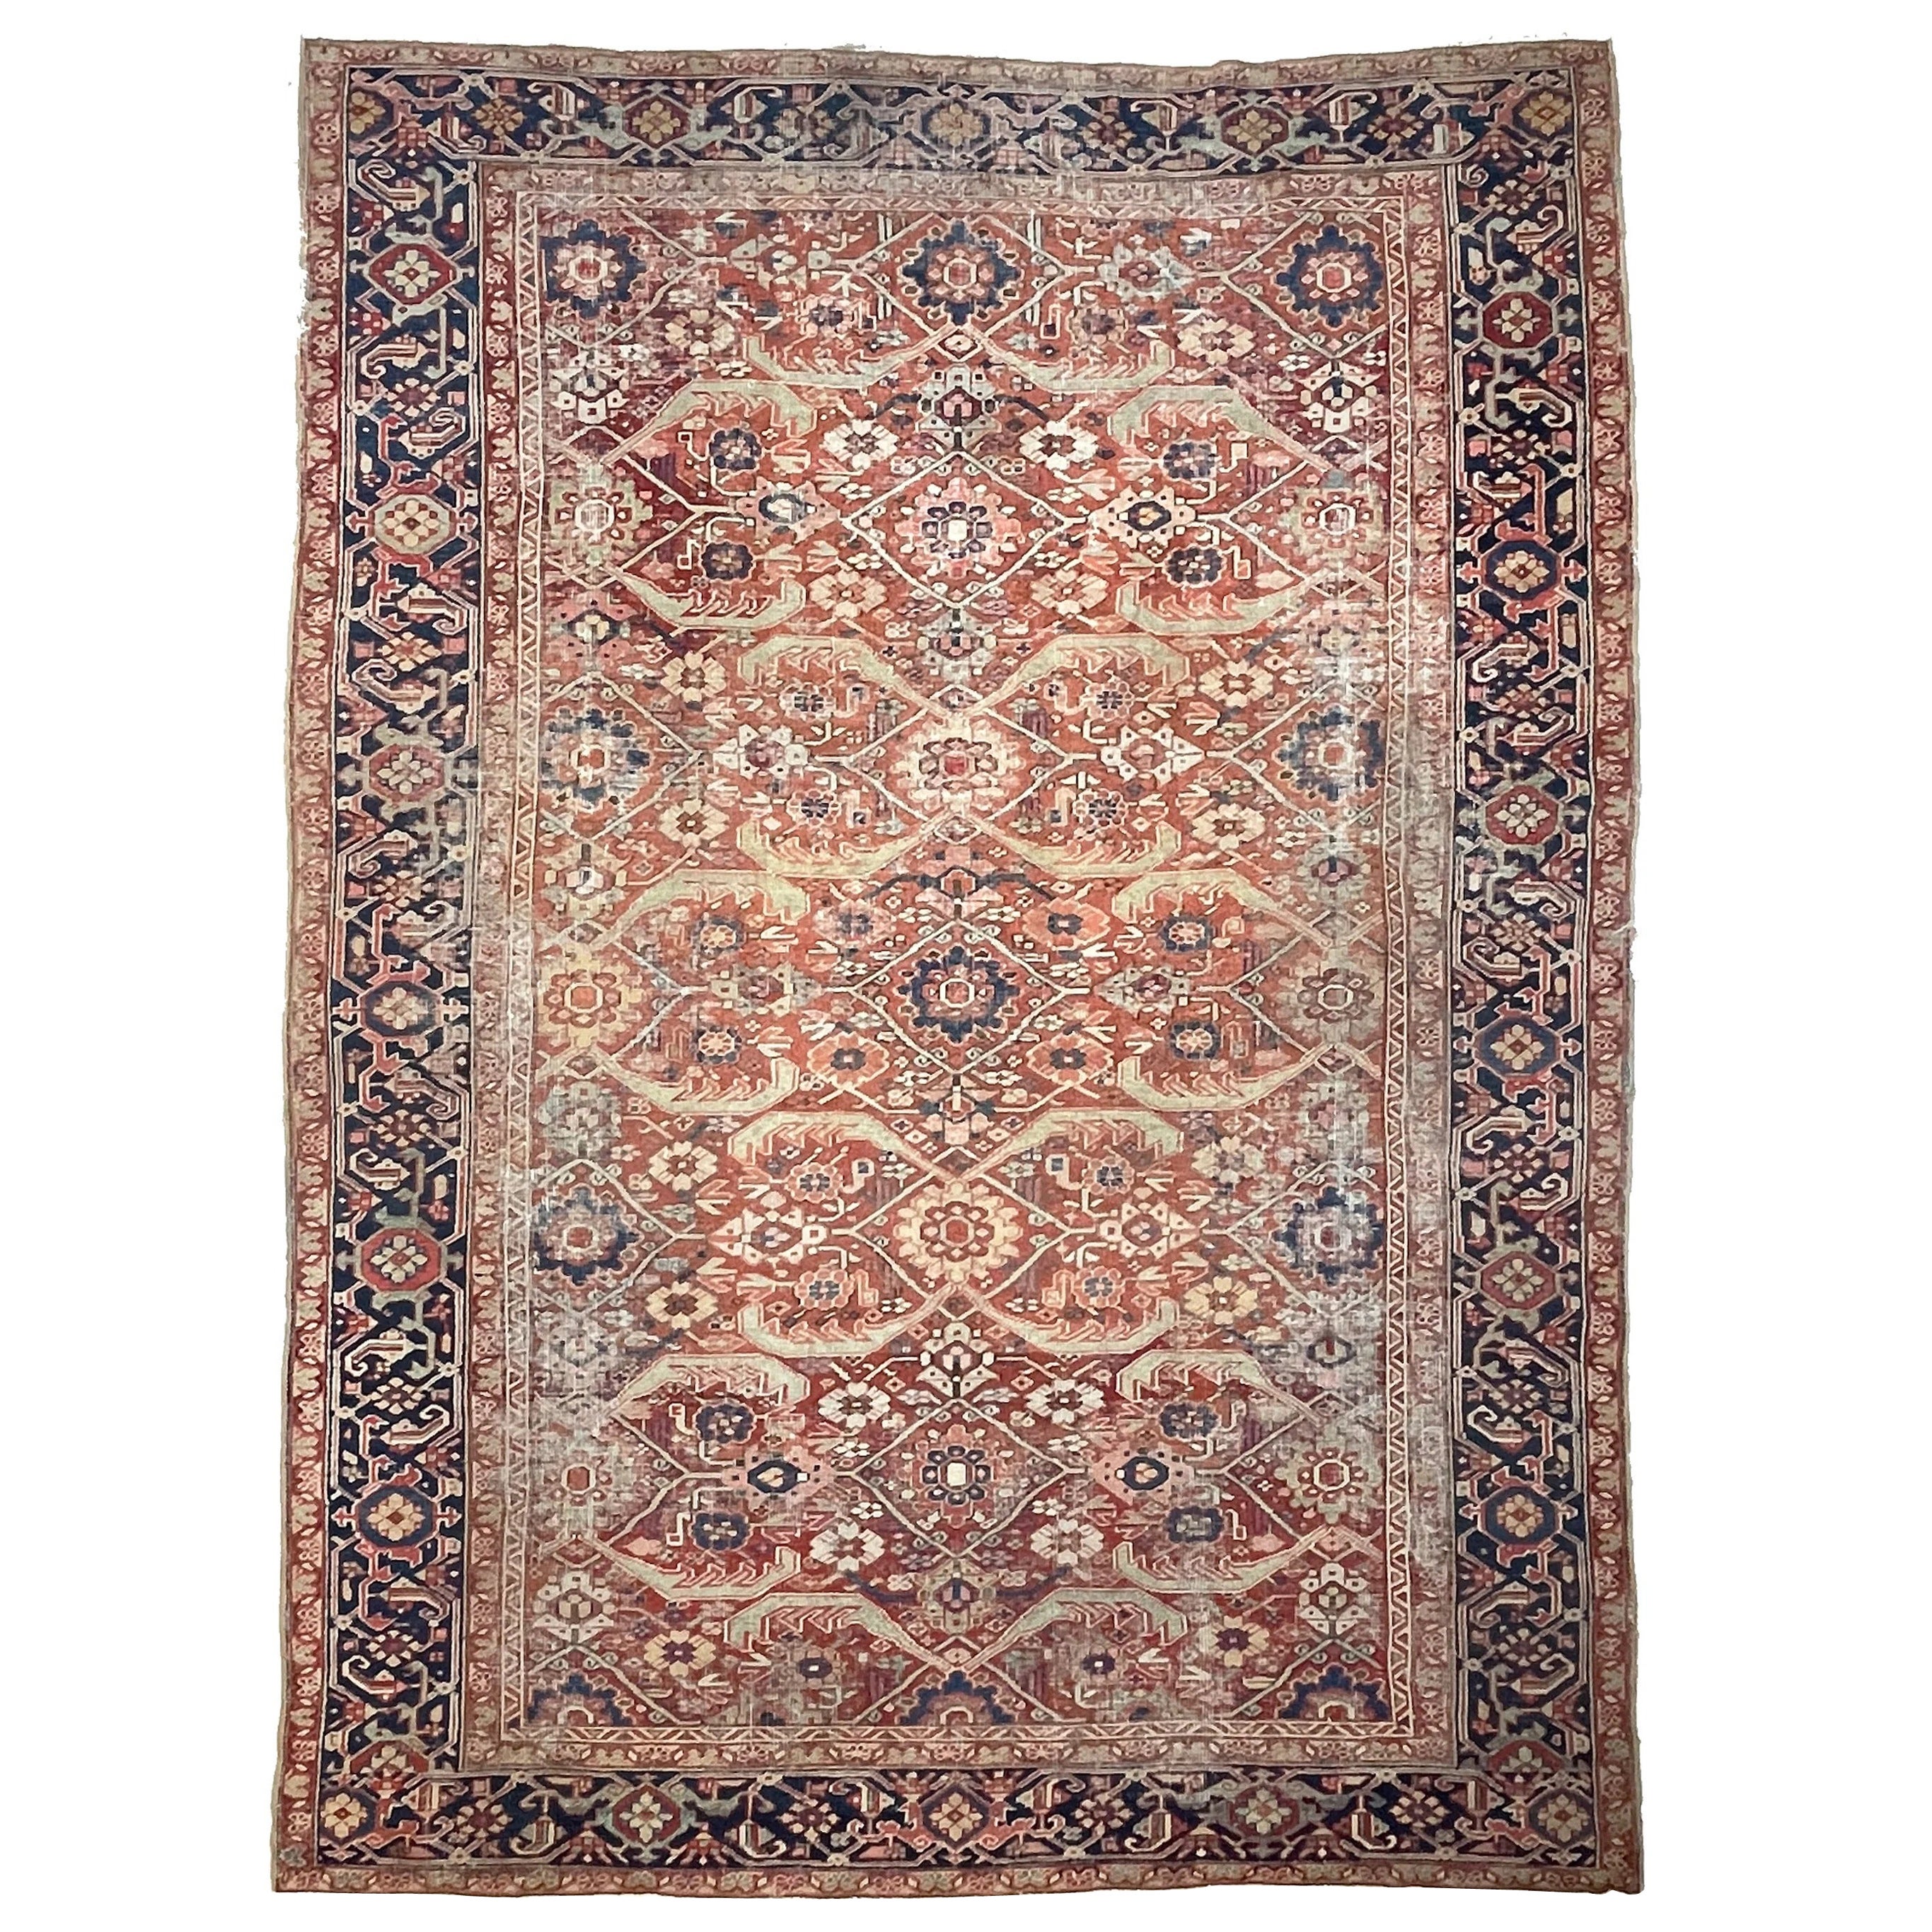 Antique Persian Mahal Rug with Geometric Flower Pattern, circa 1925-1935